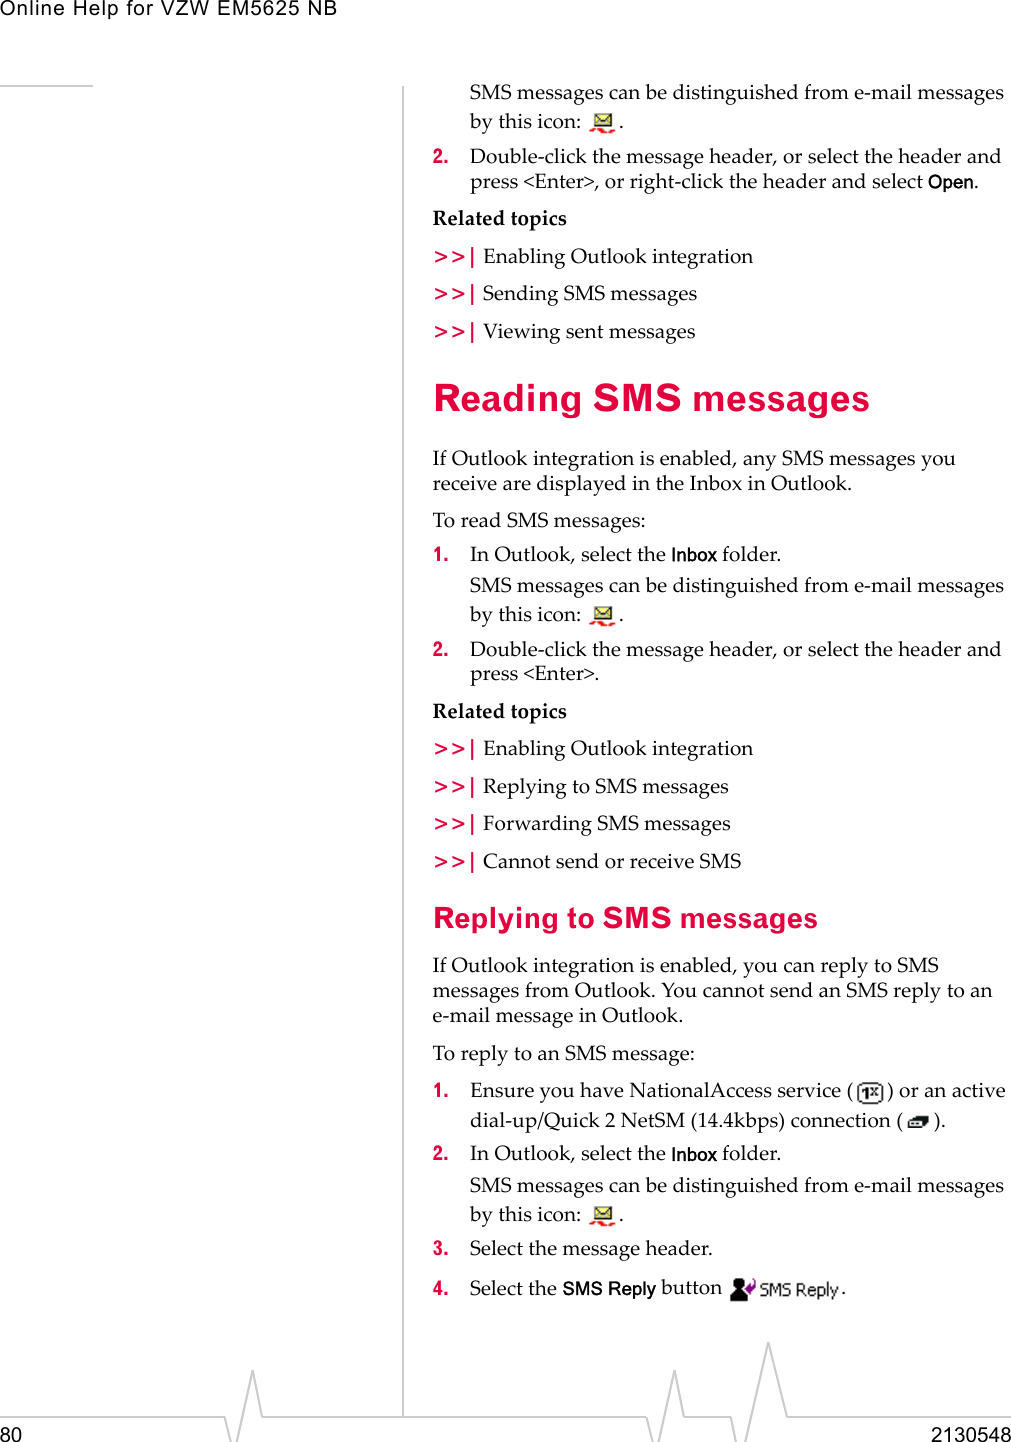 Online Help for VZW EM5625 NB80 2130548SMS messages can be distinguished from e-mail messages by this icon:  .2. Double-click the message header, or select the header and press &lt;Enter&gt;, or right-click the header and select Open.Related topics&gt;&gt;| Enabling Outlook integration&gt;&gt;| Sending SMS messages&gt;&gt;| Viewing sent messagesReading SMS messagesIf Outlook integration is enabled, any SMS messages you receive are displayed in the Inbox in Outlook. To read SMS messages:1. In Outlook, select the Inbox folder.SMS messages can be distinguished from e-mail messages by this icon:  .2. Double-click the message header, or select the header and press &lt;Enter&gt;.Related topics&gt;&gt;| Enabling Outlook integration&gt;&gt;| Replying to SMS messages&gt;&gt;| Forwarding SMS messages&gt;&gt;| Cannot send or receive SMSReplying to SMS messagesIf Outlook integration is enabled, you can reply to SMS messages from Outlook. You cannot send an SMS reply to an e-mail message in Outlook.To reply to an SMS message:1. Ensure you have NationalAccess service ( ) or an active dial-up/Quick 2 NetSM (14.4kbps) connection ( ).2. In Outlook, select the Inbox folder.SMS messages can be distinguished from e-mail messages by this icon:  .3. Select the message header.4. Select the SMS Reply button  .